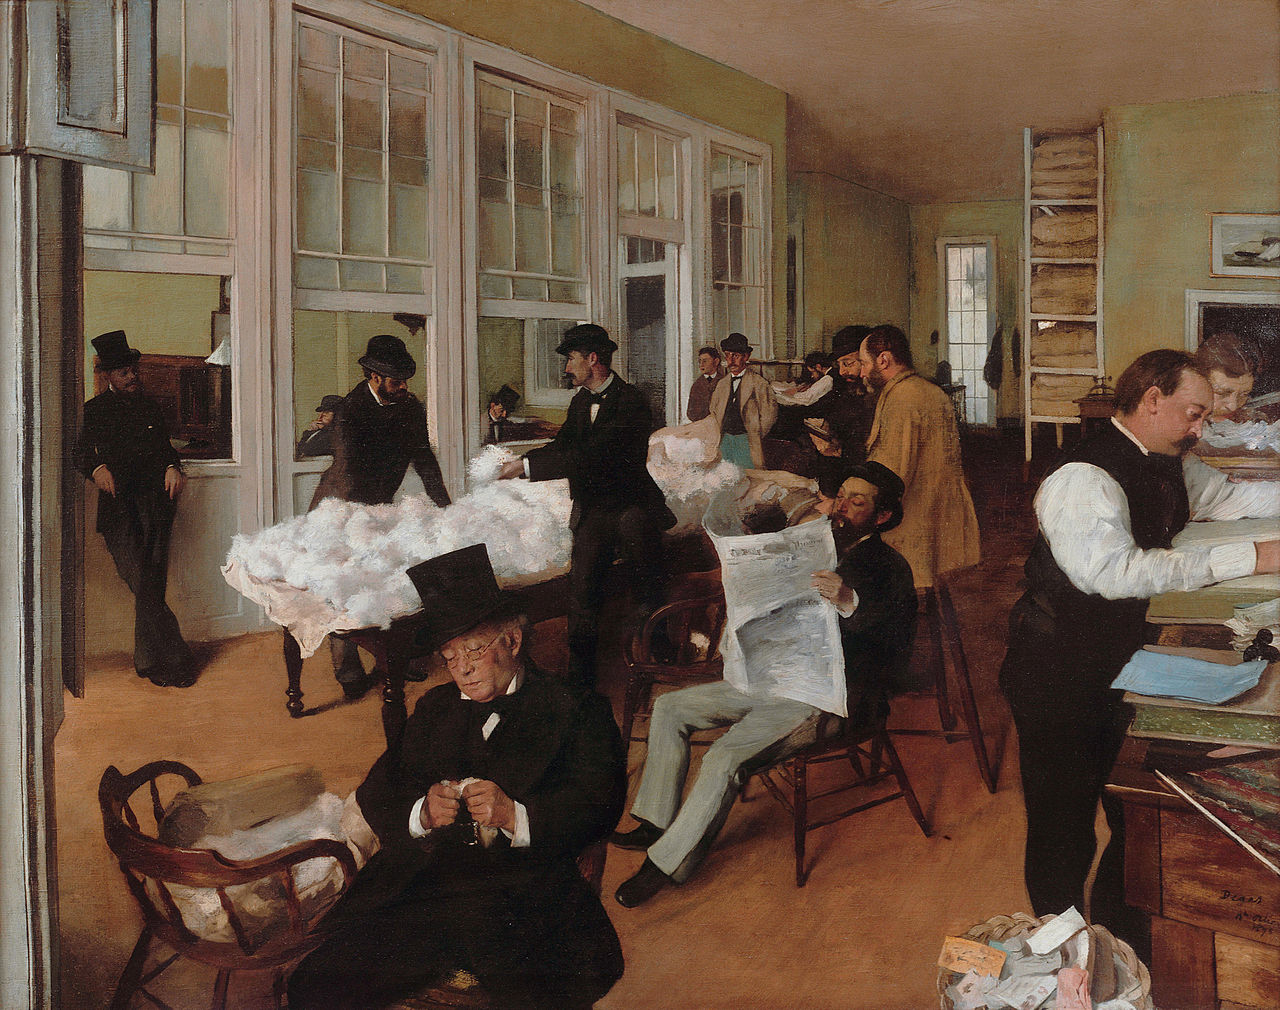 Edgar Degas, the life and works of the Impressionist master